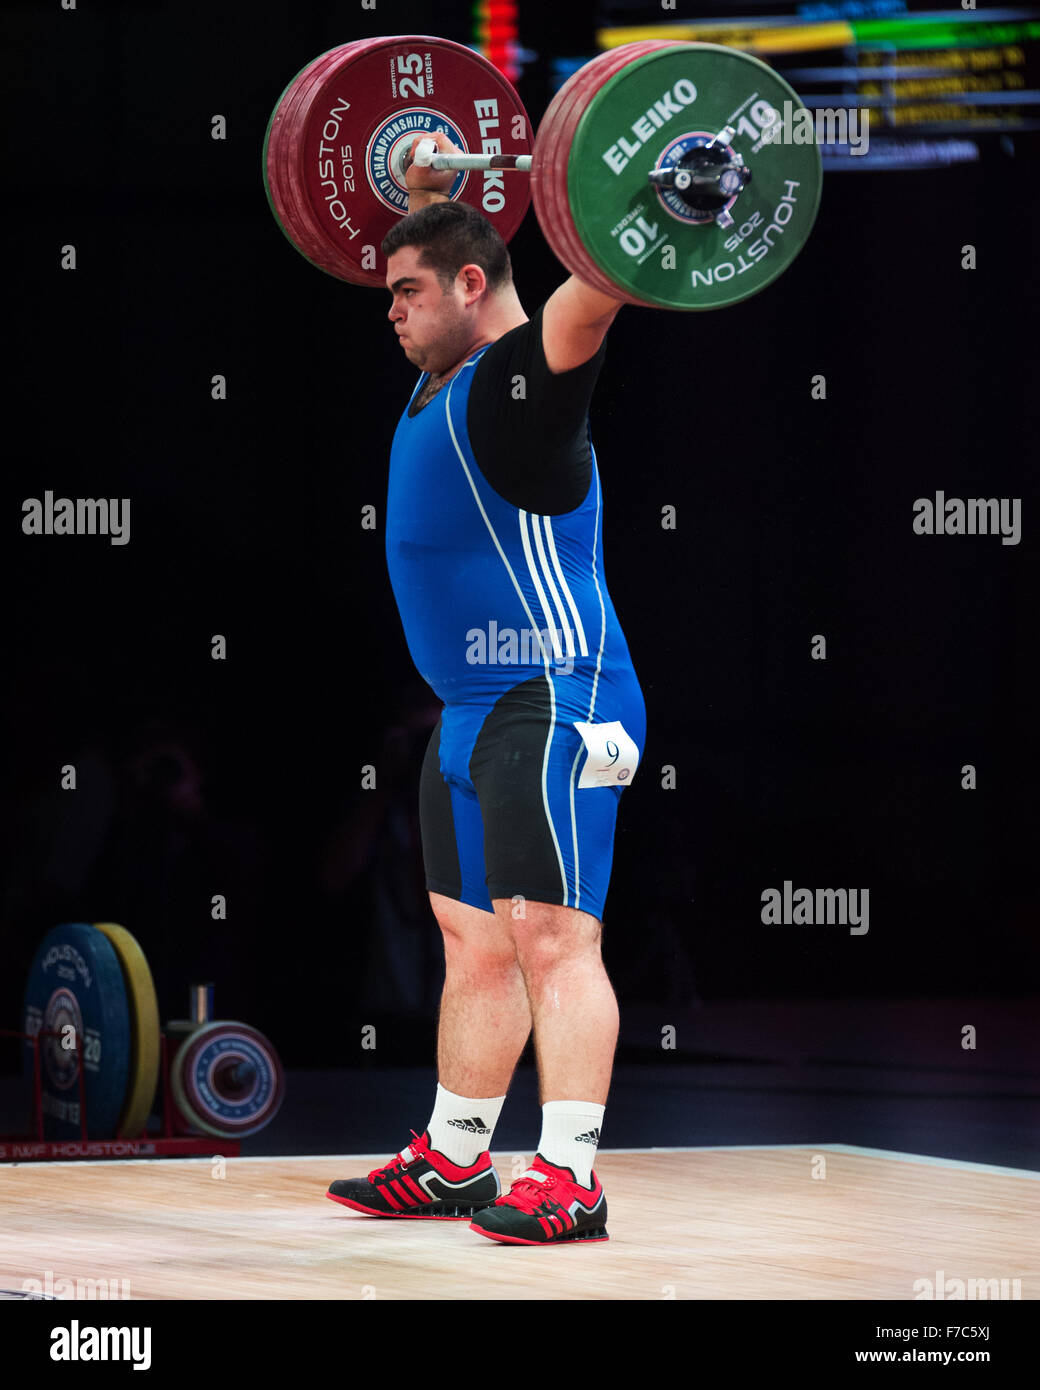 November 26, 2015: Gor Minasyan wins the bronze medal in the Snatch in the Men's 105+ Class at the World Weightlfting Championships in Houston, Texas. Brent Clark/Alamy Live News Stock Photo